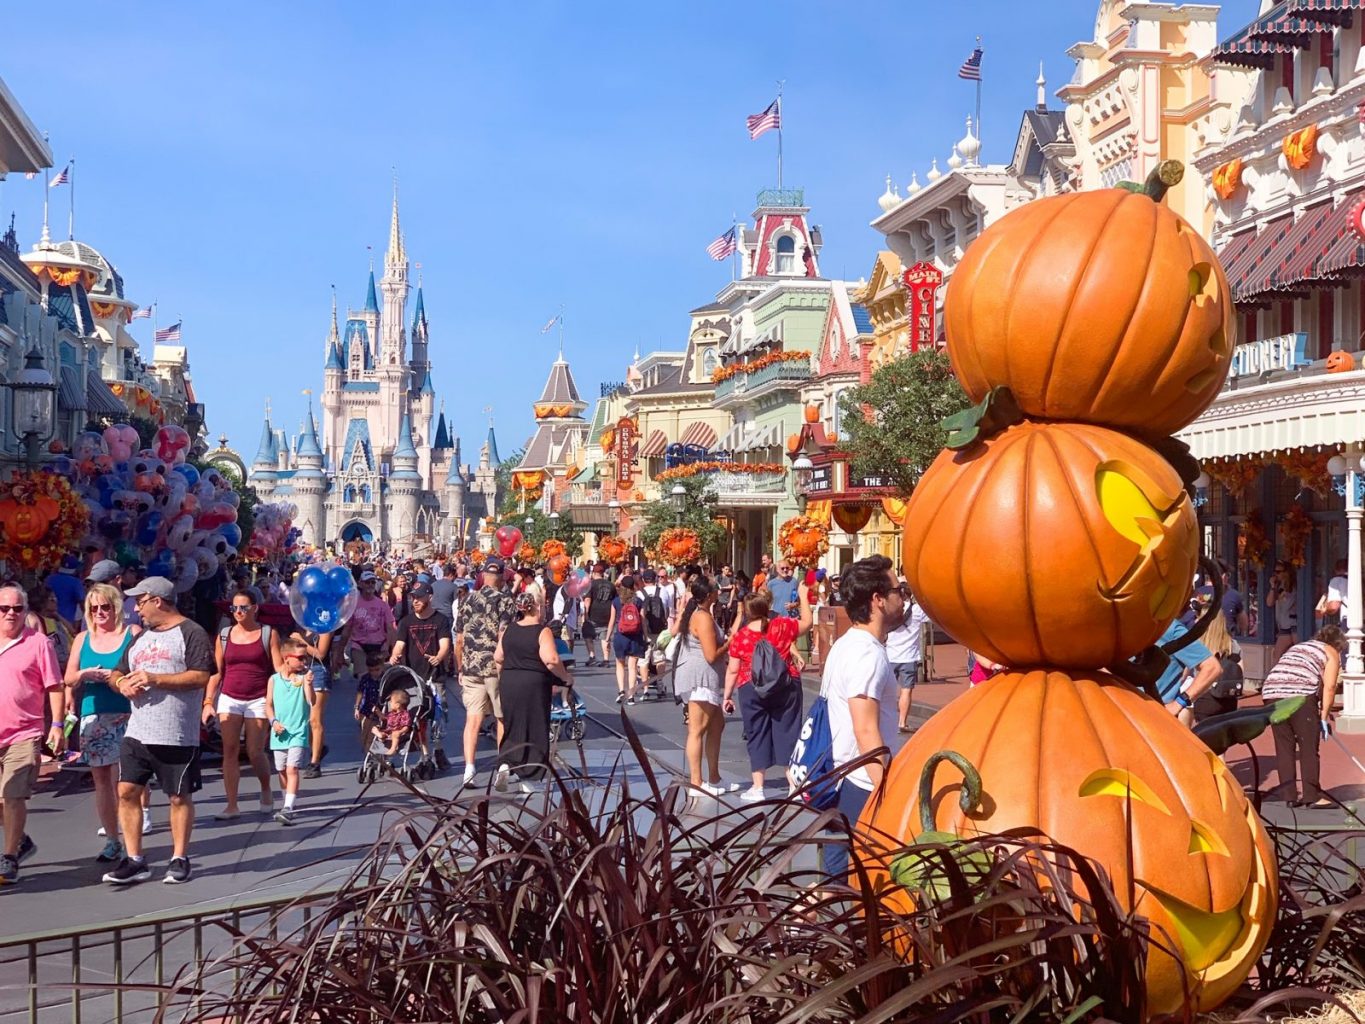 view of main street as people walk down the street next to pumpkin decorations in magic kingdom